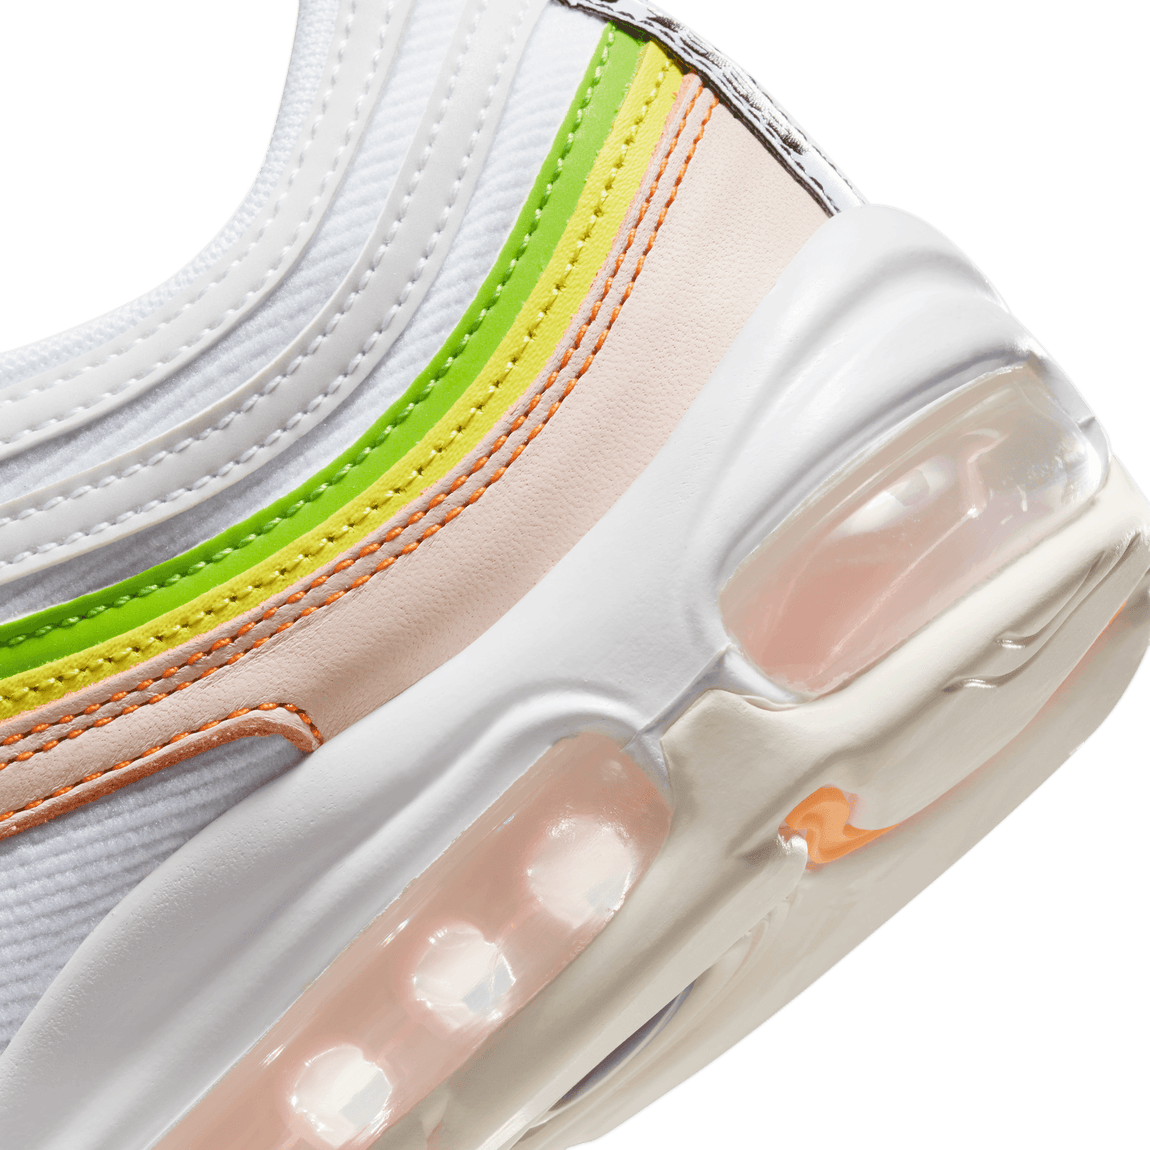 Women's Nike Air Max 97 (White/Black/Pearl Pink-Action Green) - Women's Nike Air Max 97 (White/Black/Pearl Pink-Action Green) - 